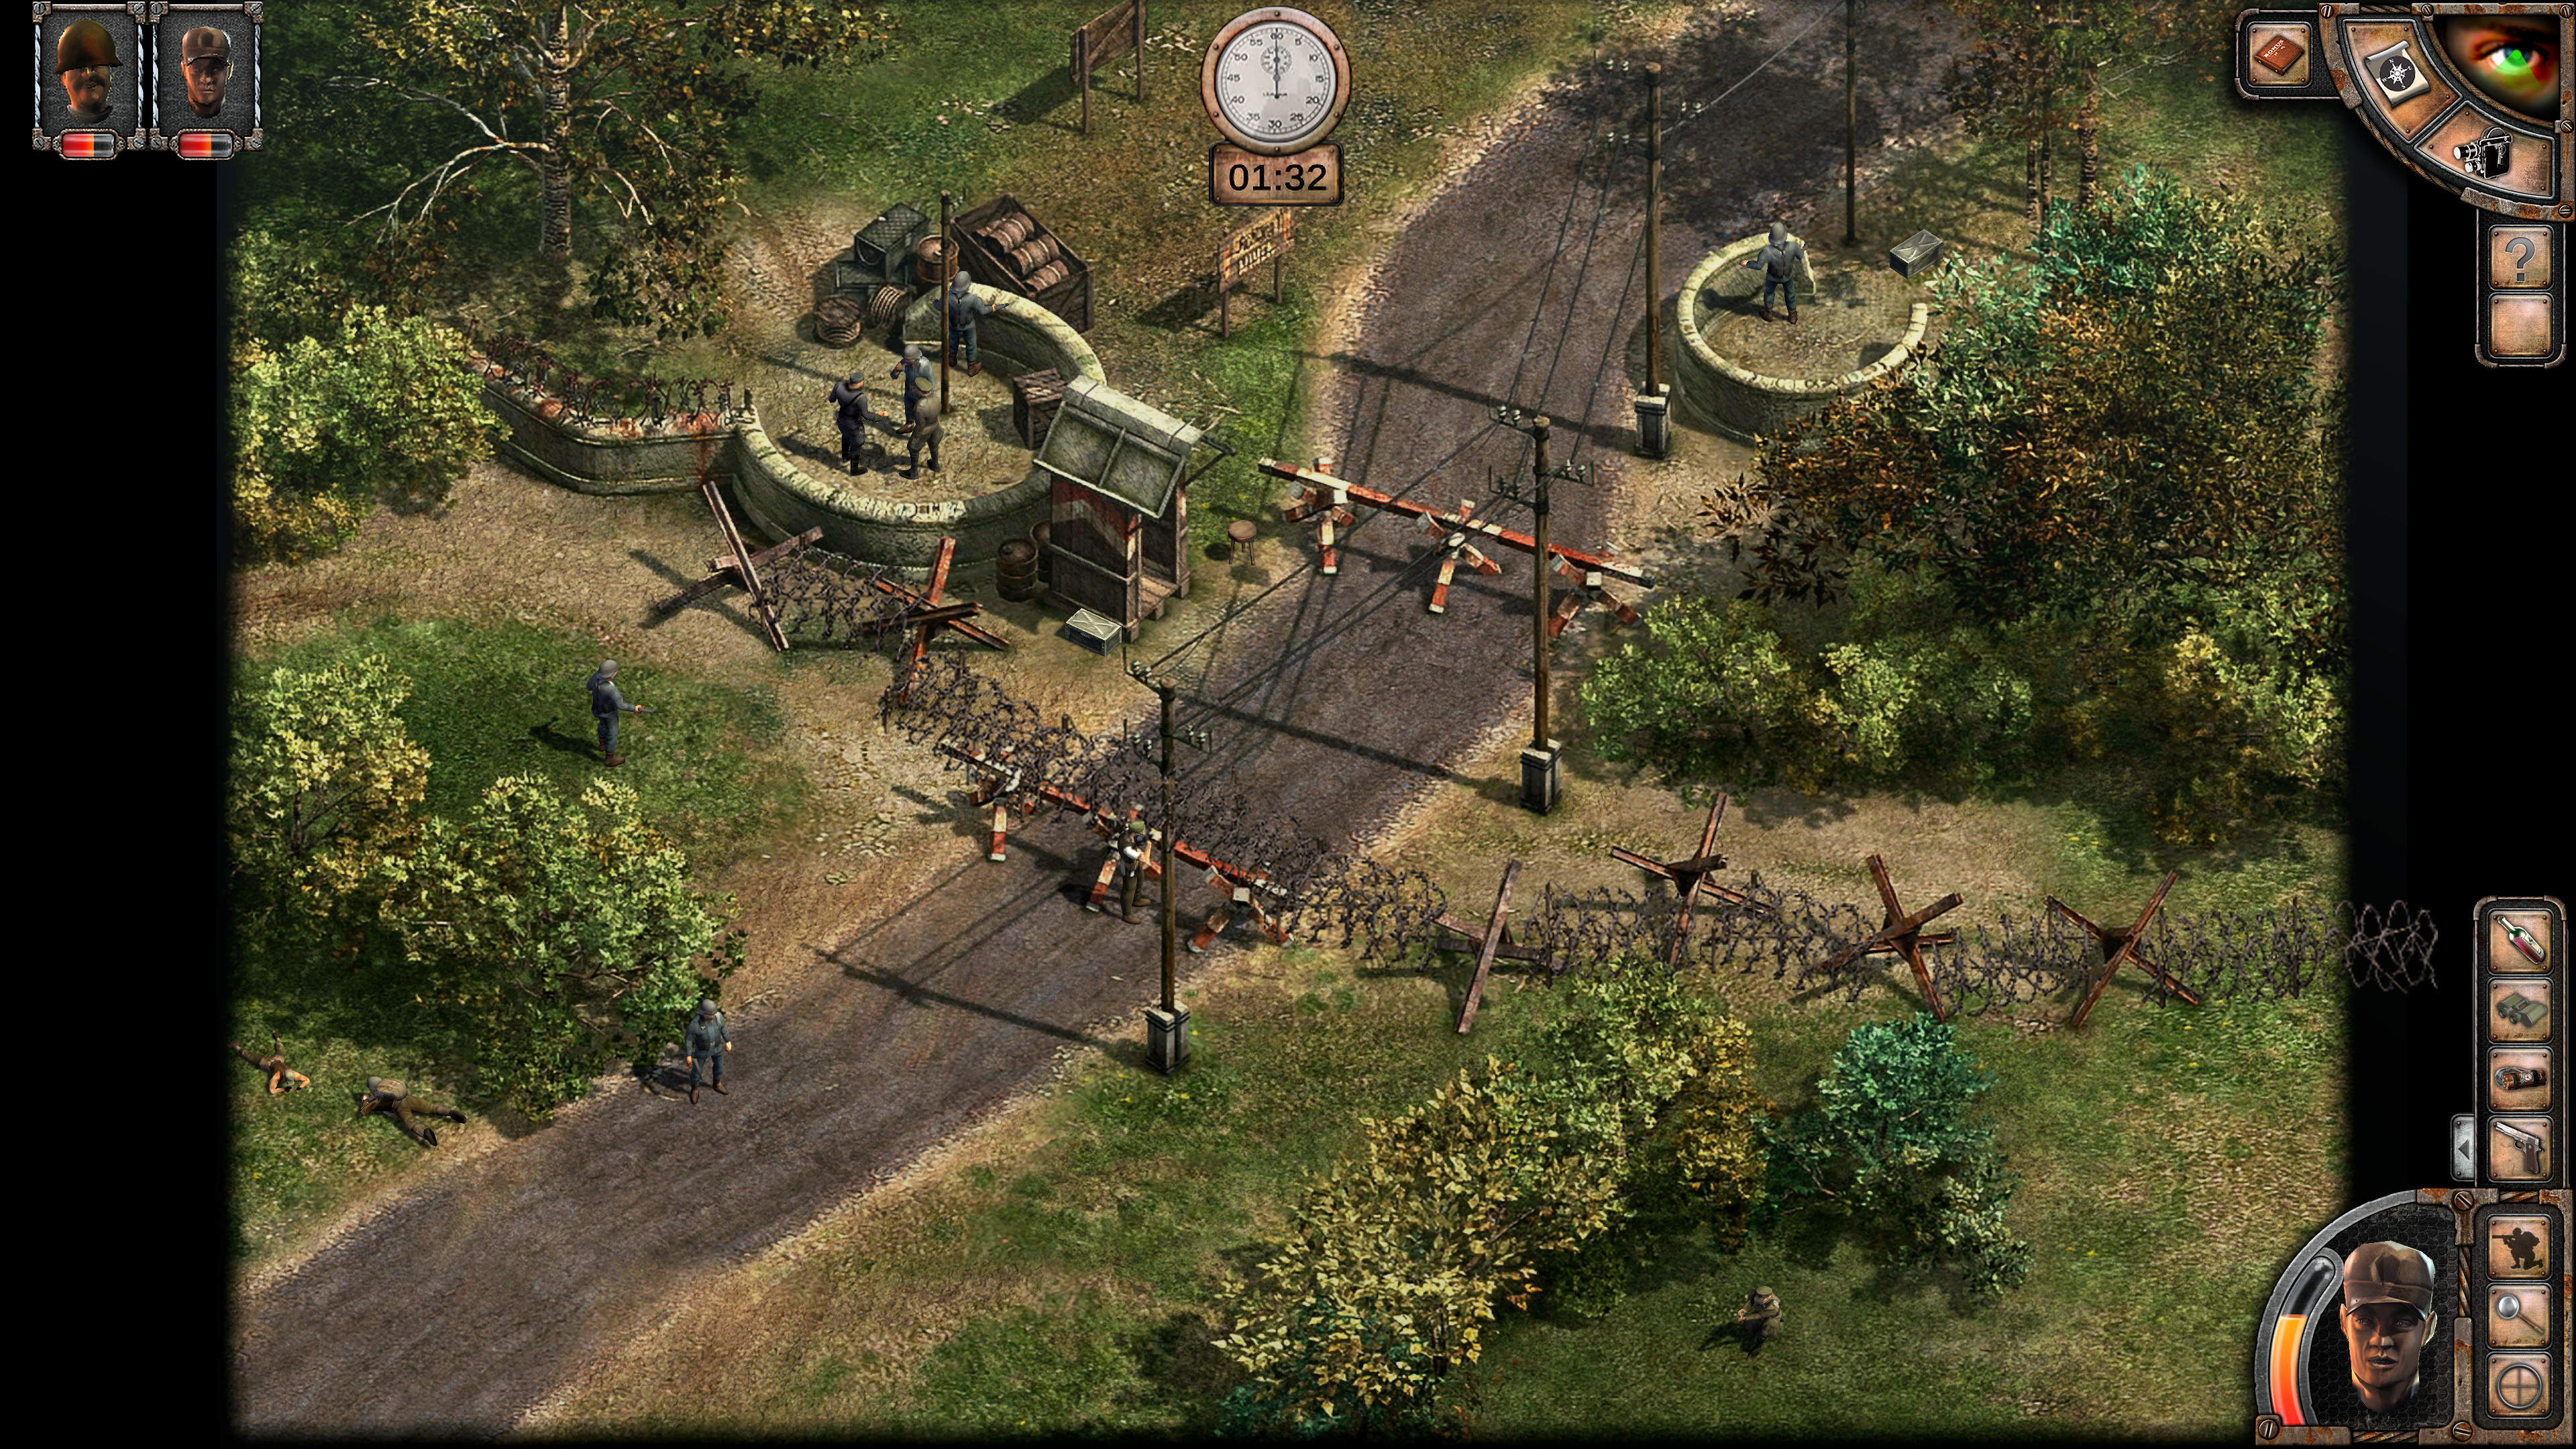 Hd Remasters Of Commandos 2 And Praetorians Now Have Gameplay